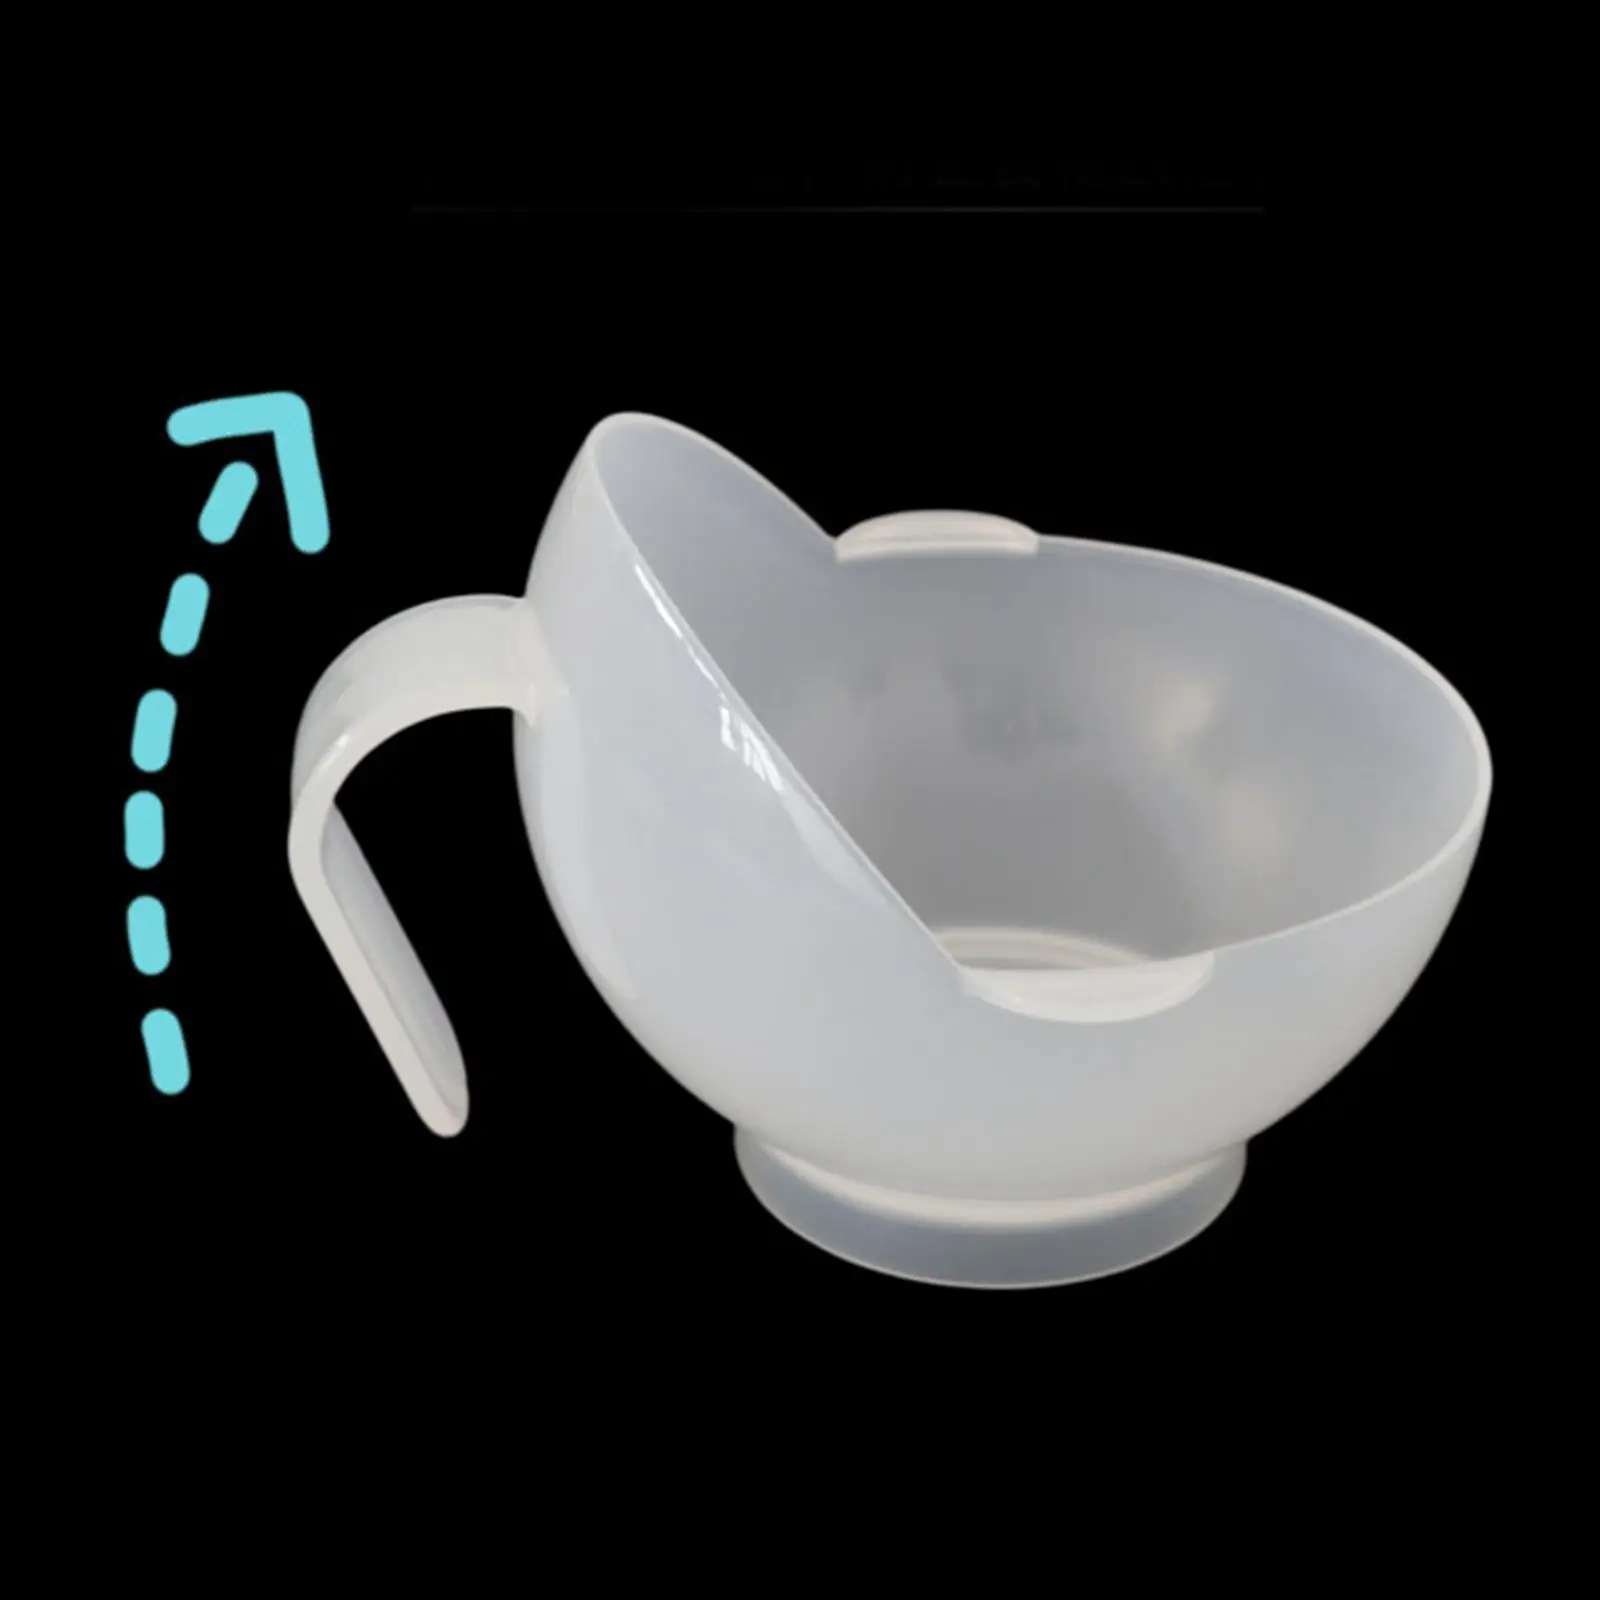 Spill Proof Scoop Bowl Spill Proof Scoop Plates for Disabled Adults Elderly